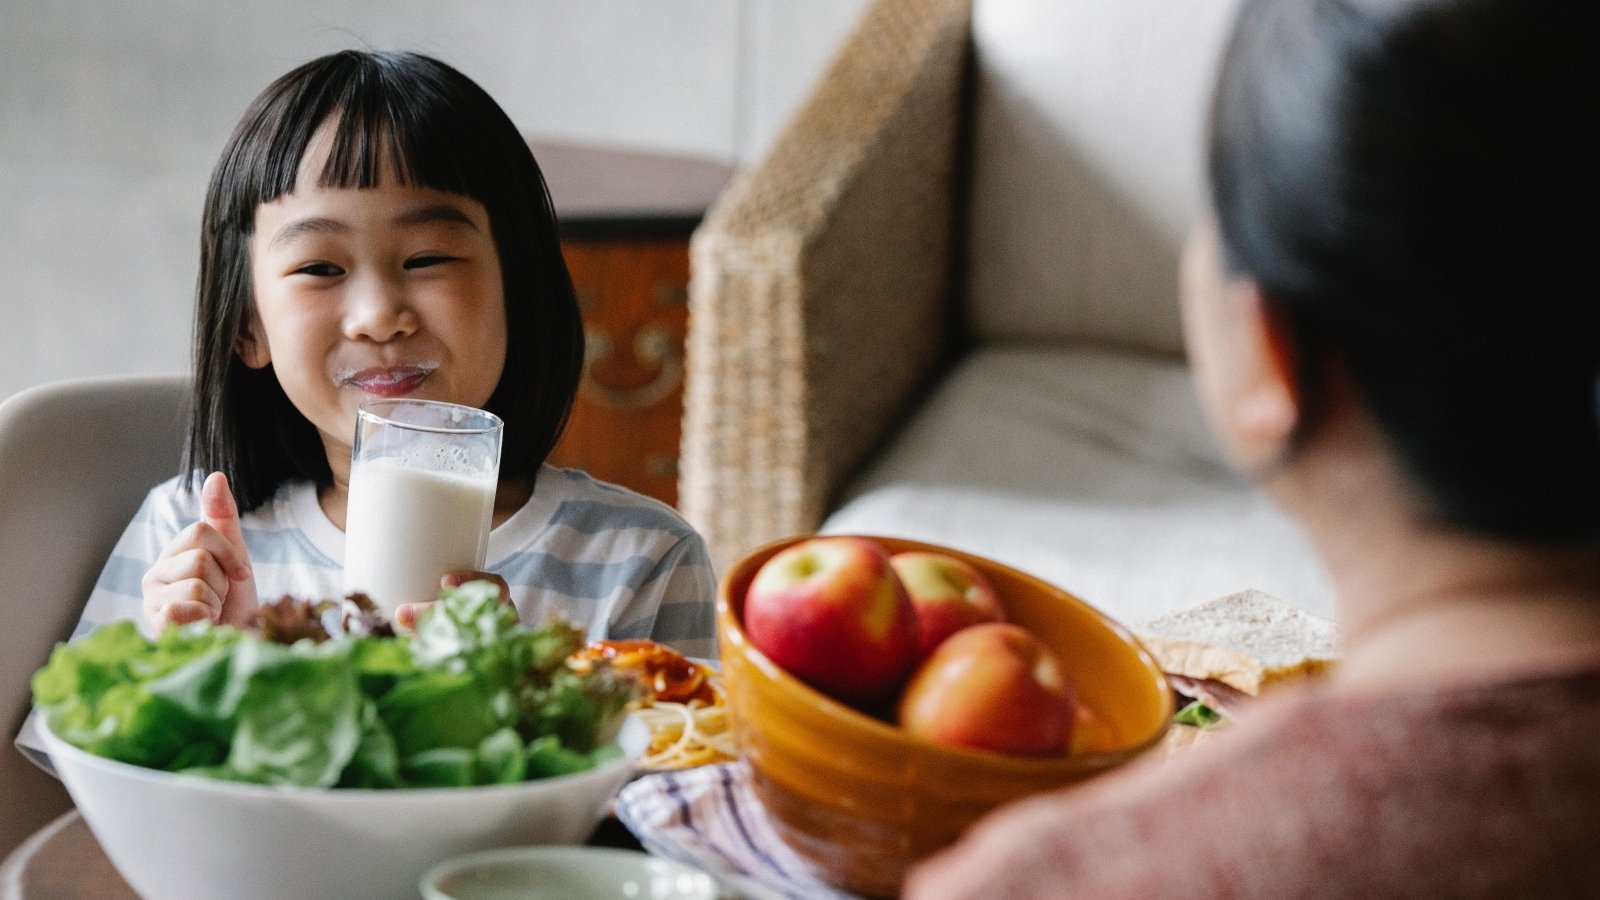 A child smiling and drinking milk with salad and fruit on the table